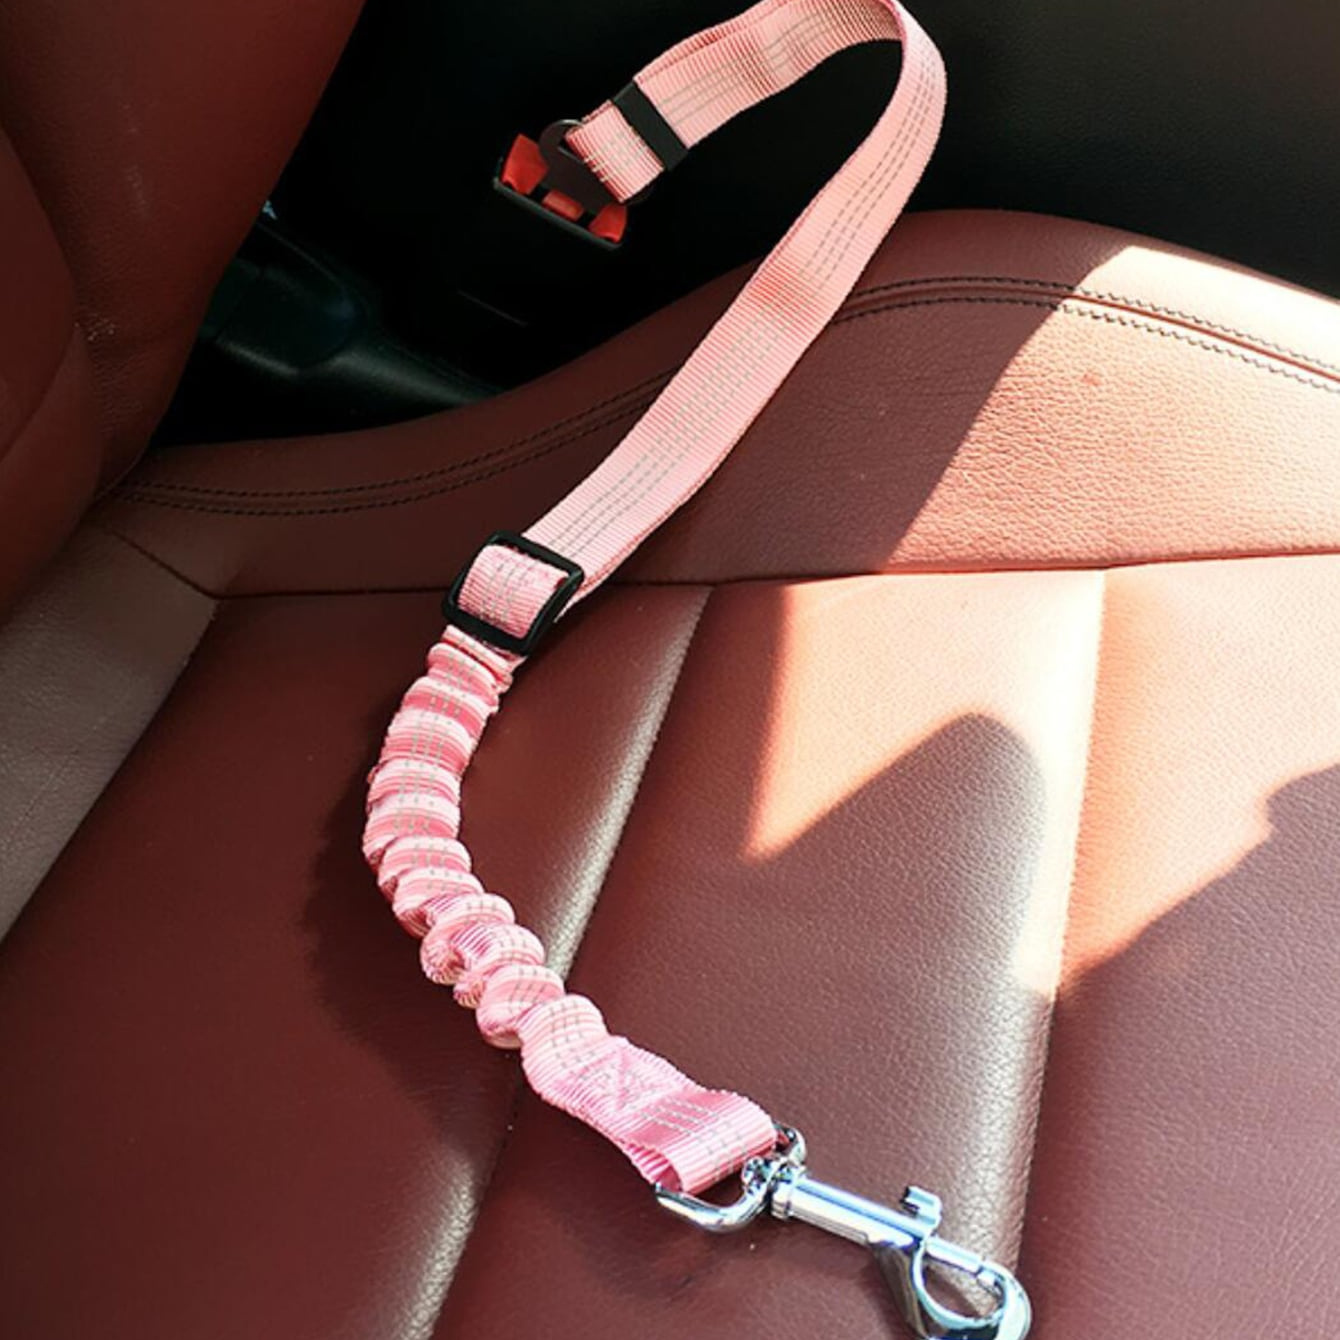 

Adjustable Dog Seat Belt With Elastic Buffer, Polyamide Vehicle Harness For Dogs, Hand Wash Only - Patterned Safety Car Restraint